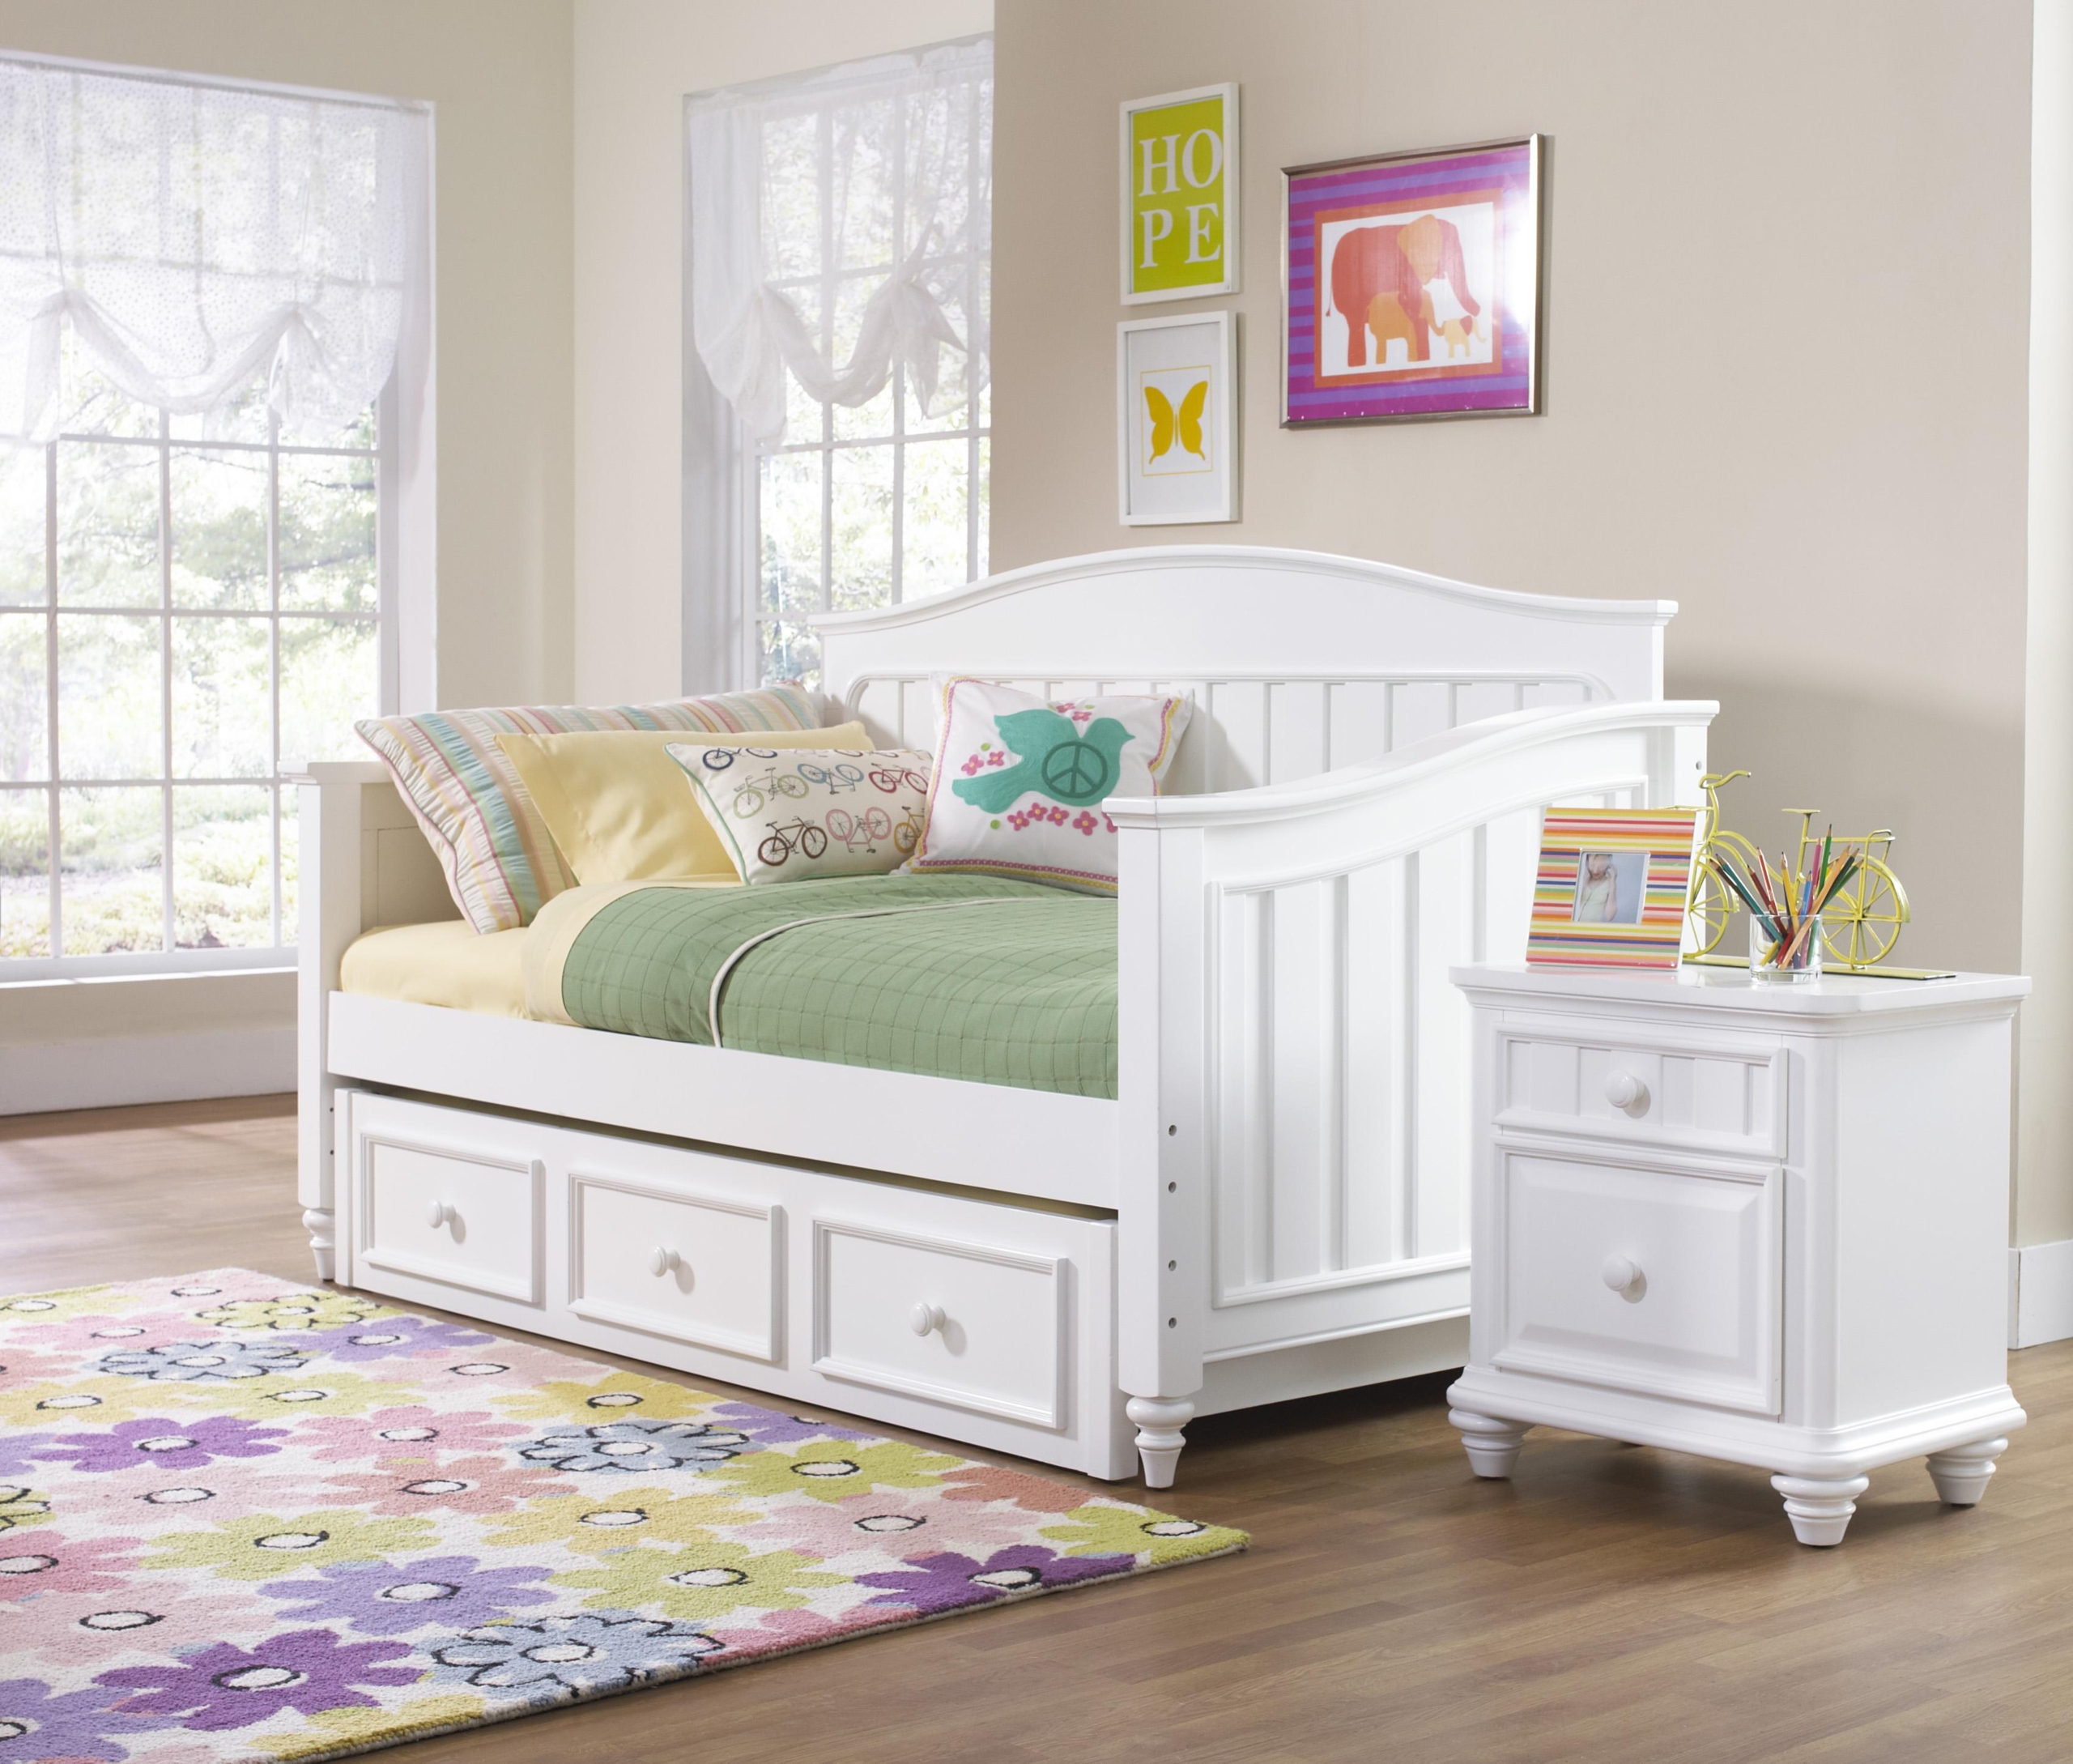 Samuel lawrence furniture summertime day bed with trundle storage unit